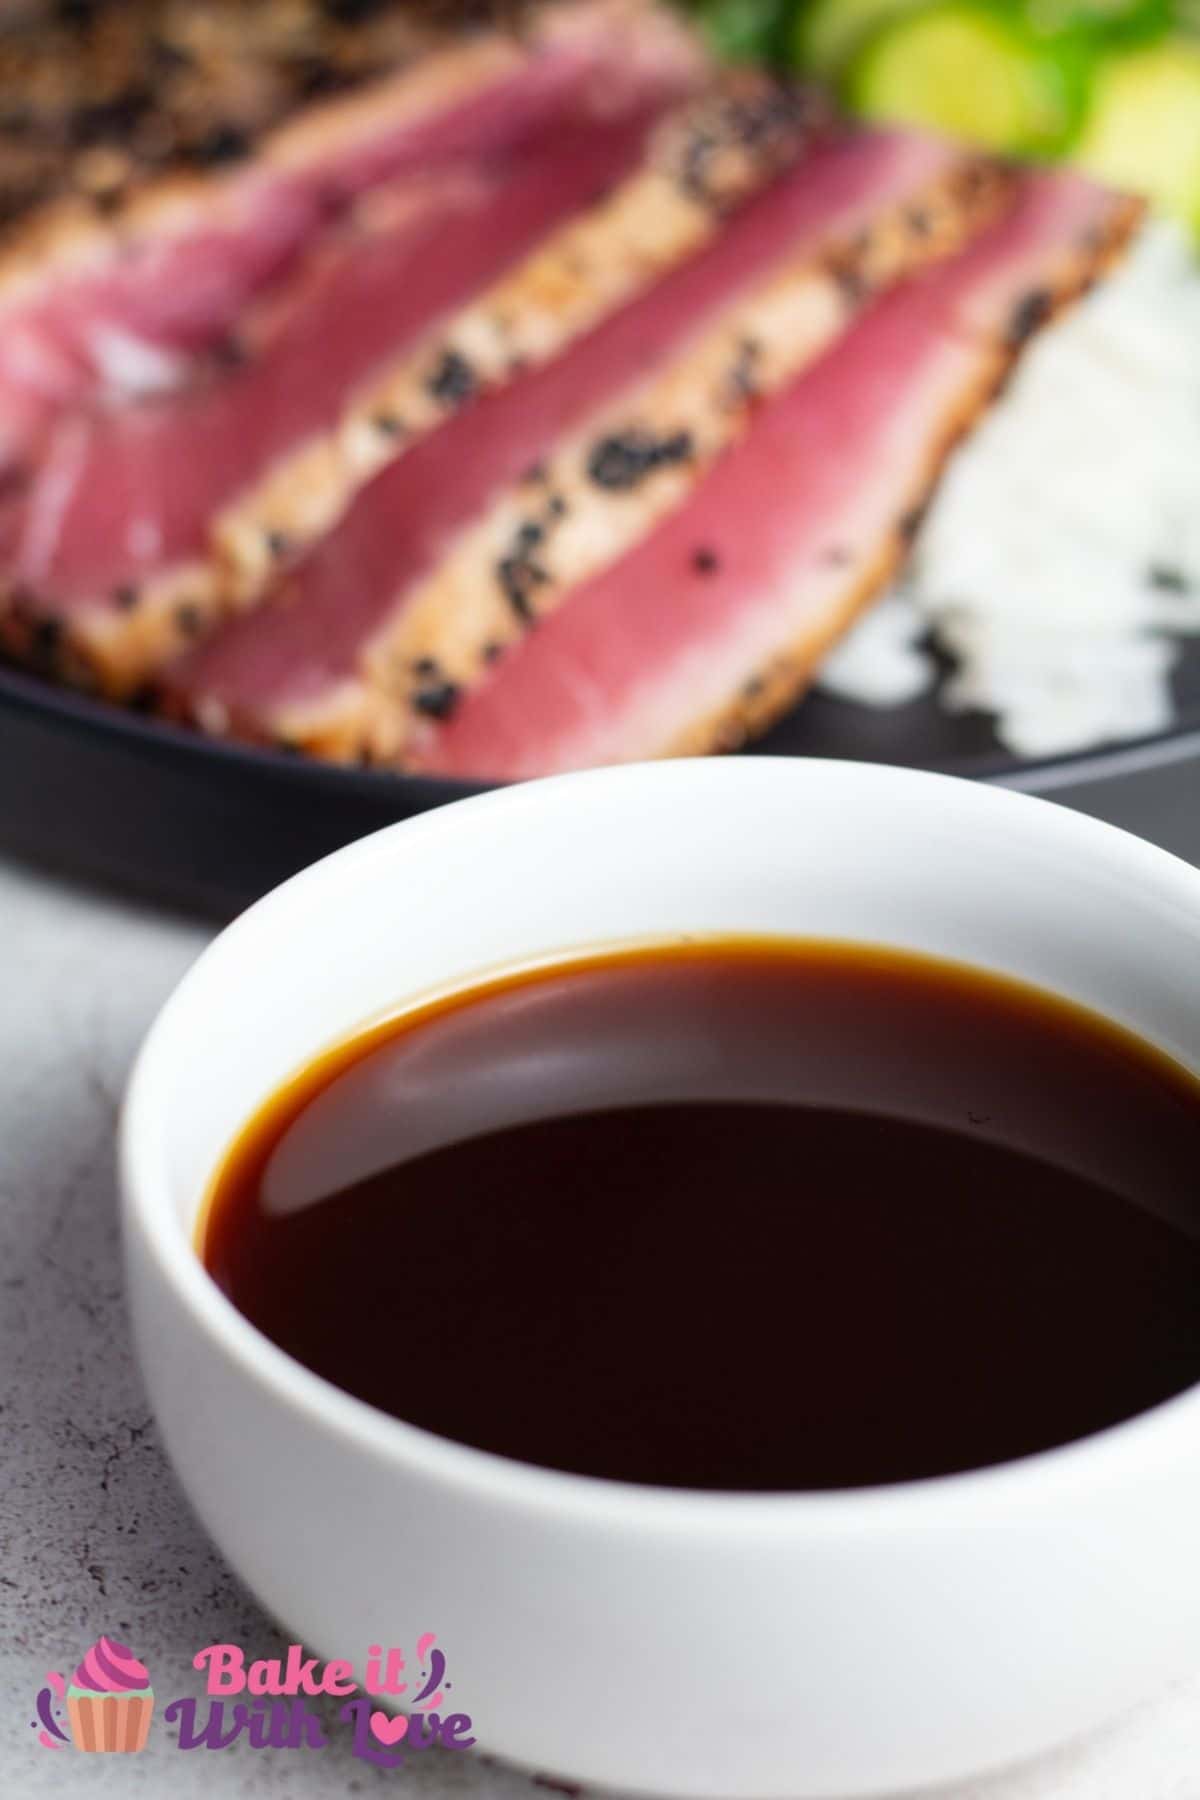 Tall image showing ponzu dipping sauce in a small white bowl.